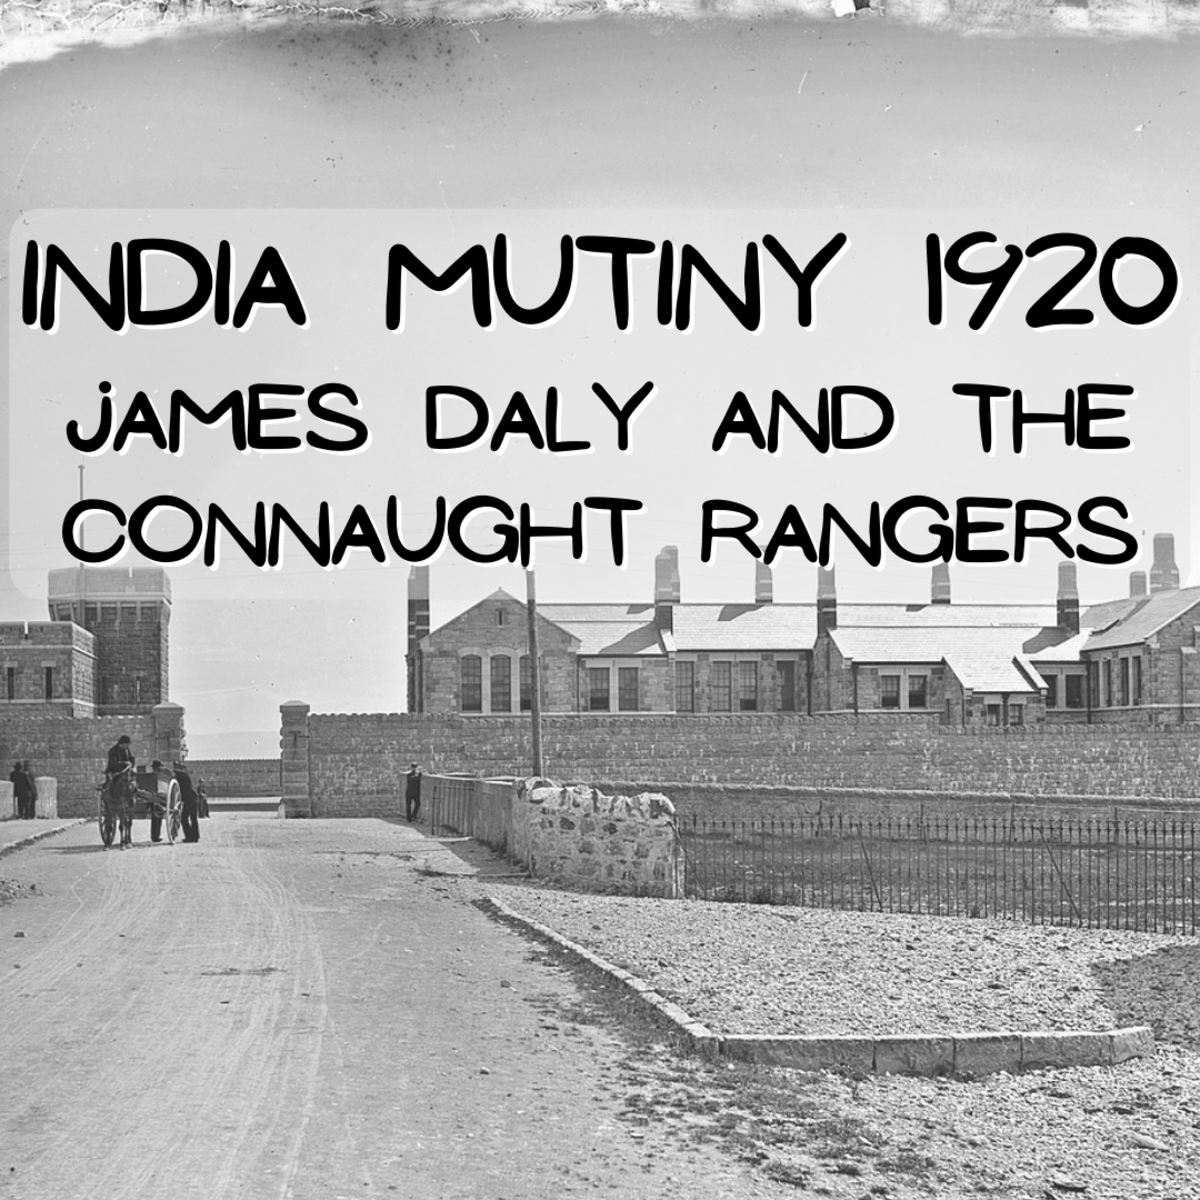 Learn about James Daly and much more in this informative historical piece on the Connaught Rangers mutiny in Jullundur, India in 1920. The image above shows the home station of the Connaught Rangers in Galway City, Ireland.